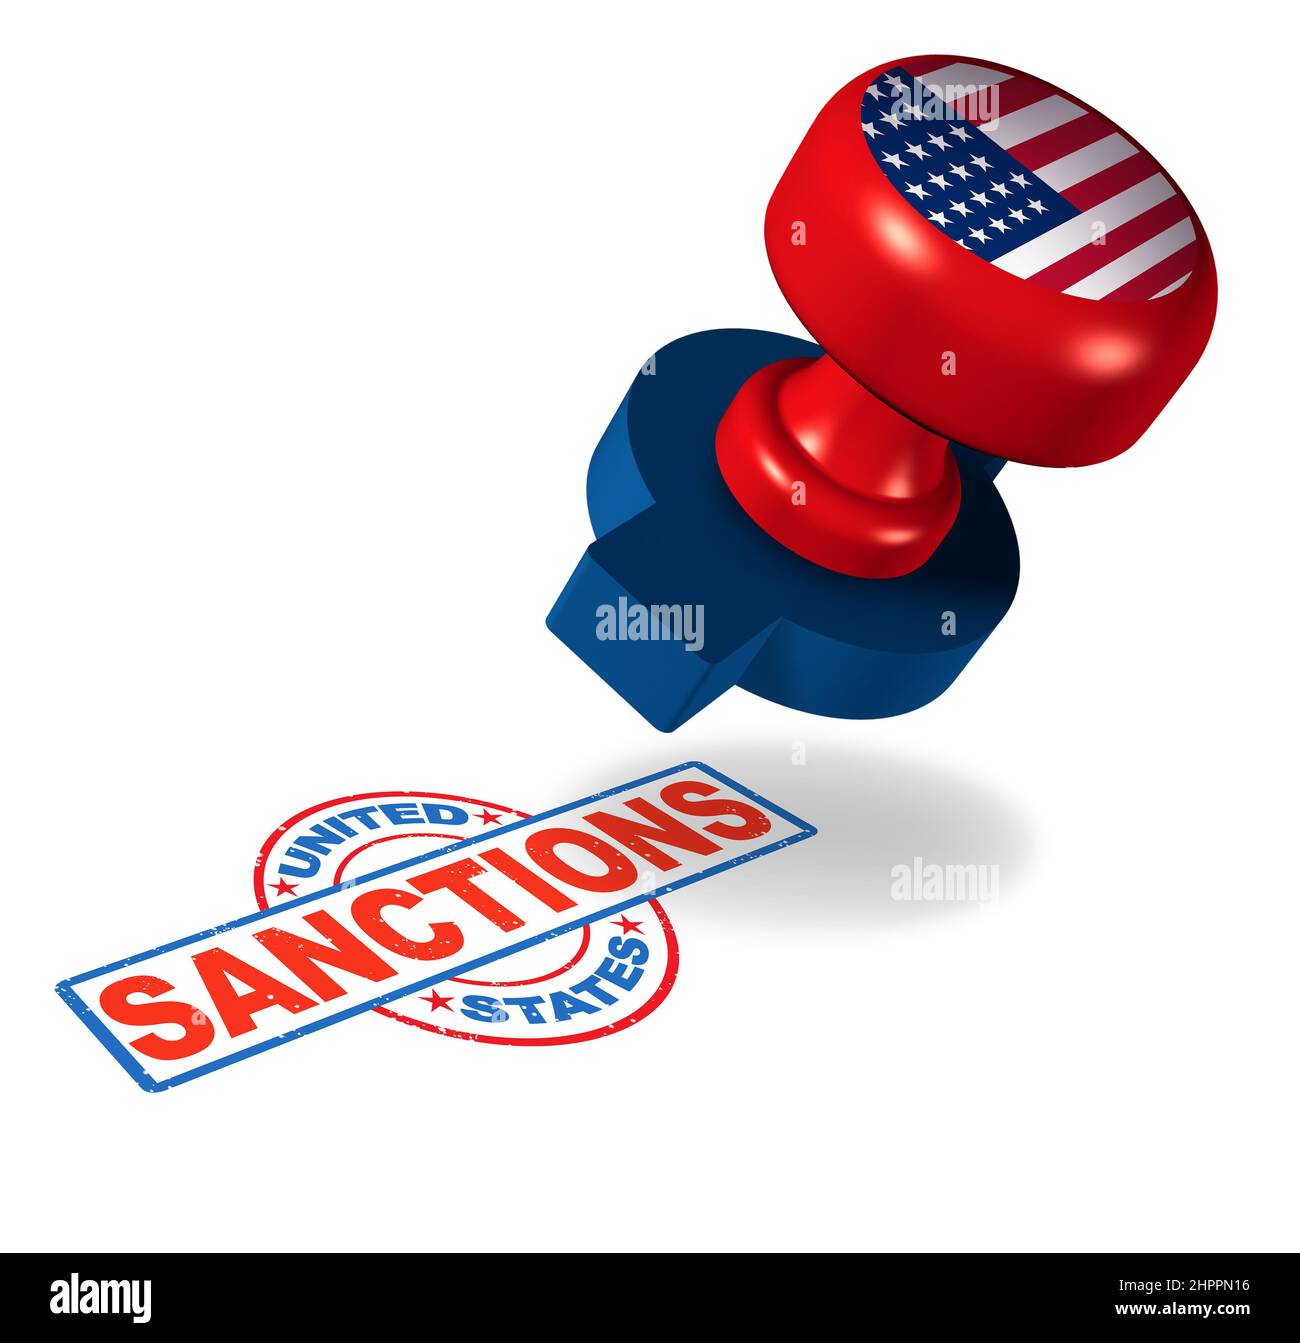 United States sanctions and  tariffs or American trade tariff in the US as a stamp mark as an economic import and exports trade barrier concept. Stock Photo